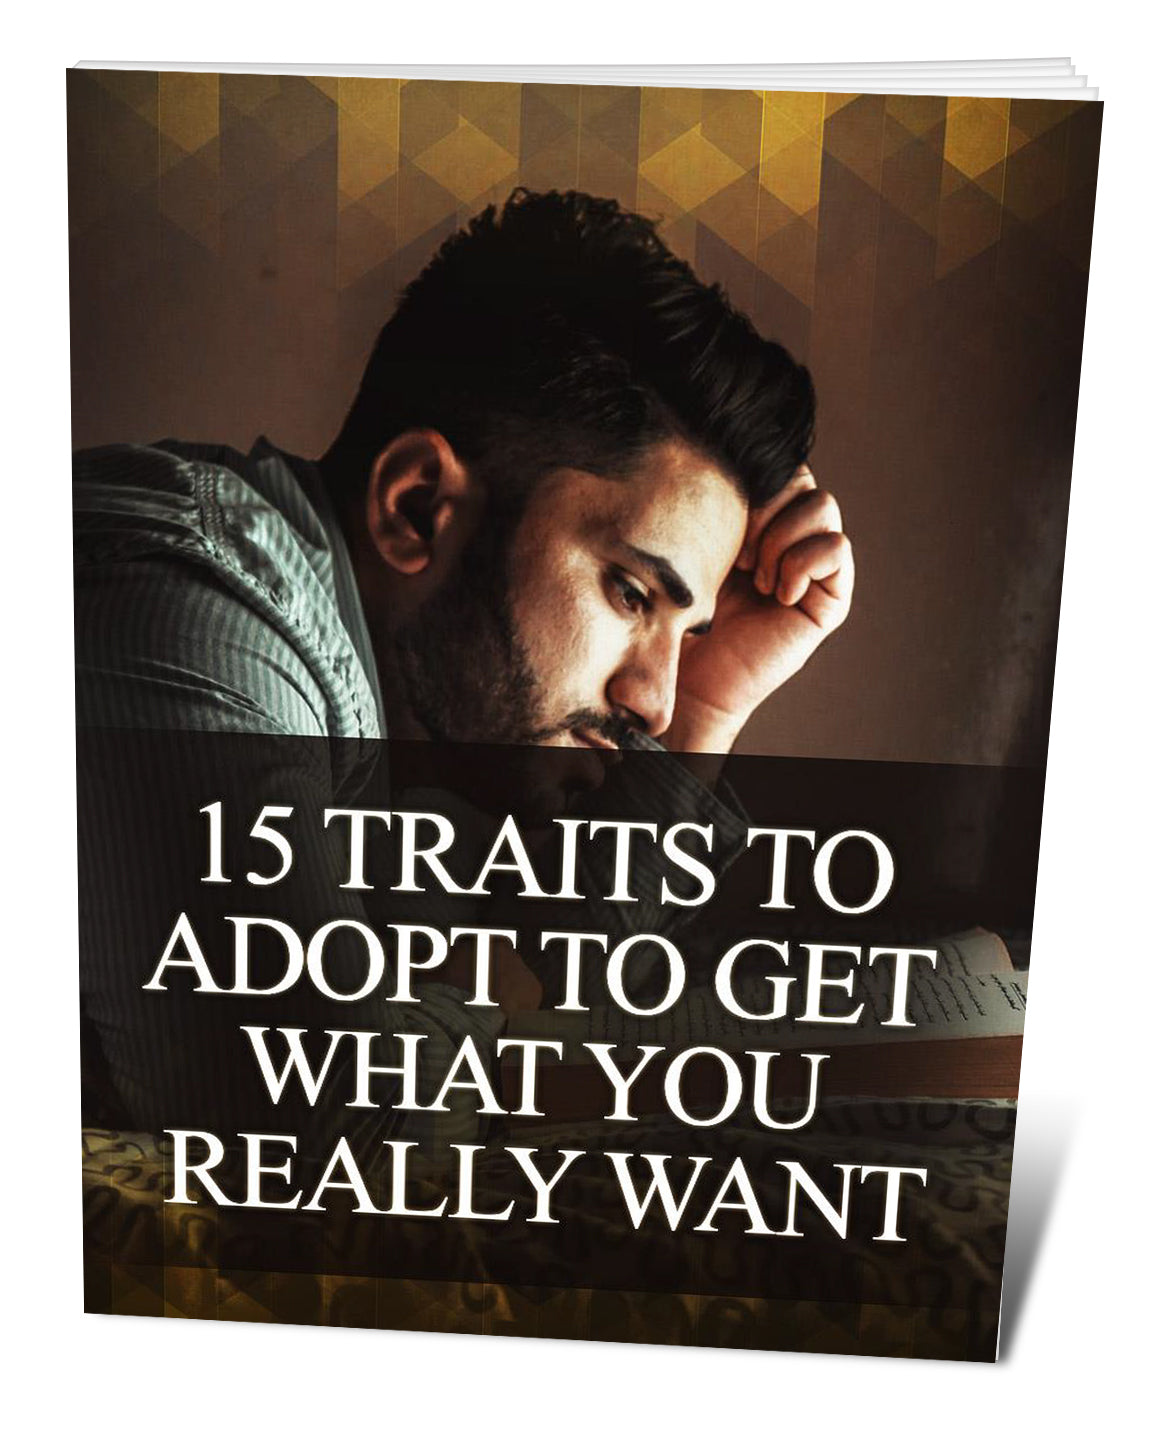 15 Traits to Adopt to Get What You Really Want